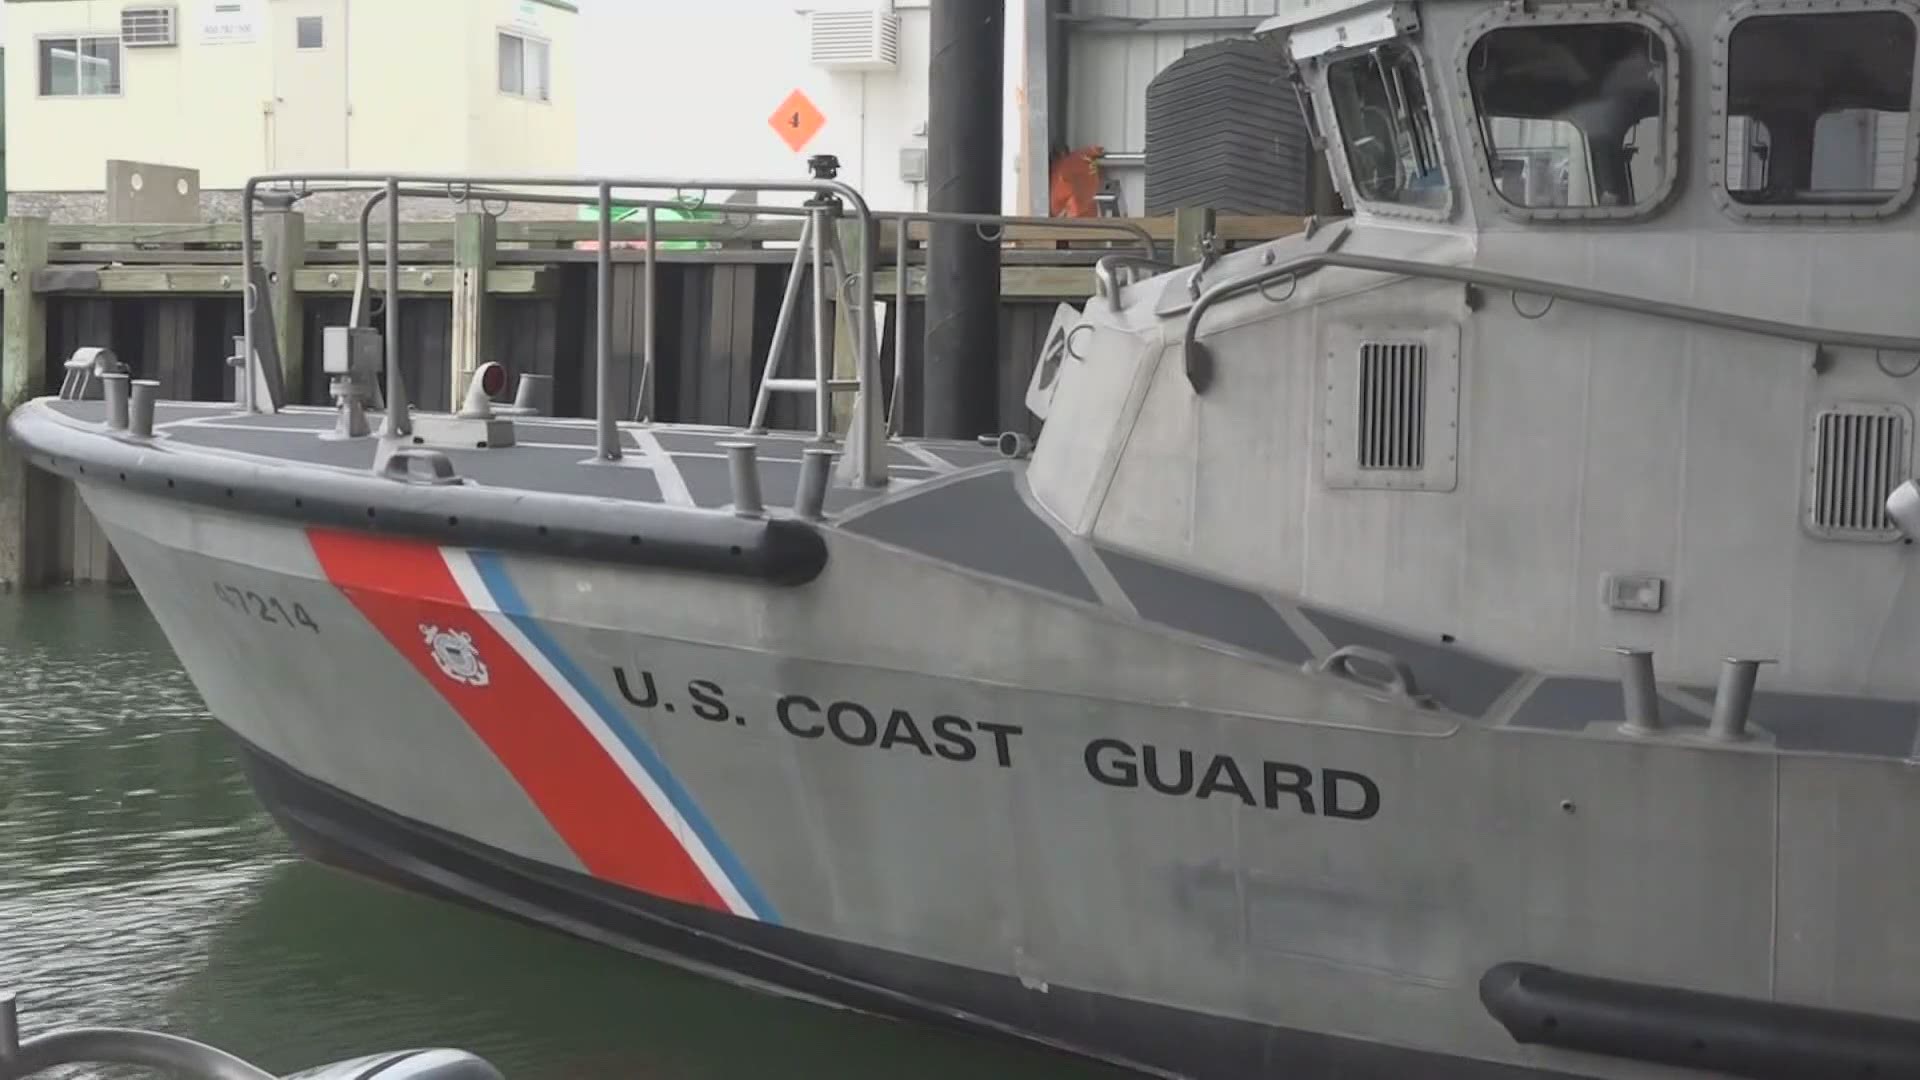 For the second time in as many weeks, the Coast Guard was out searching for Maine fishermen whose boat sank.